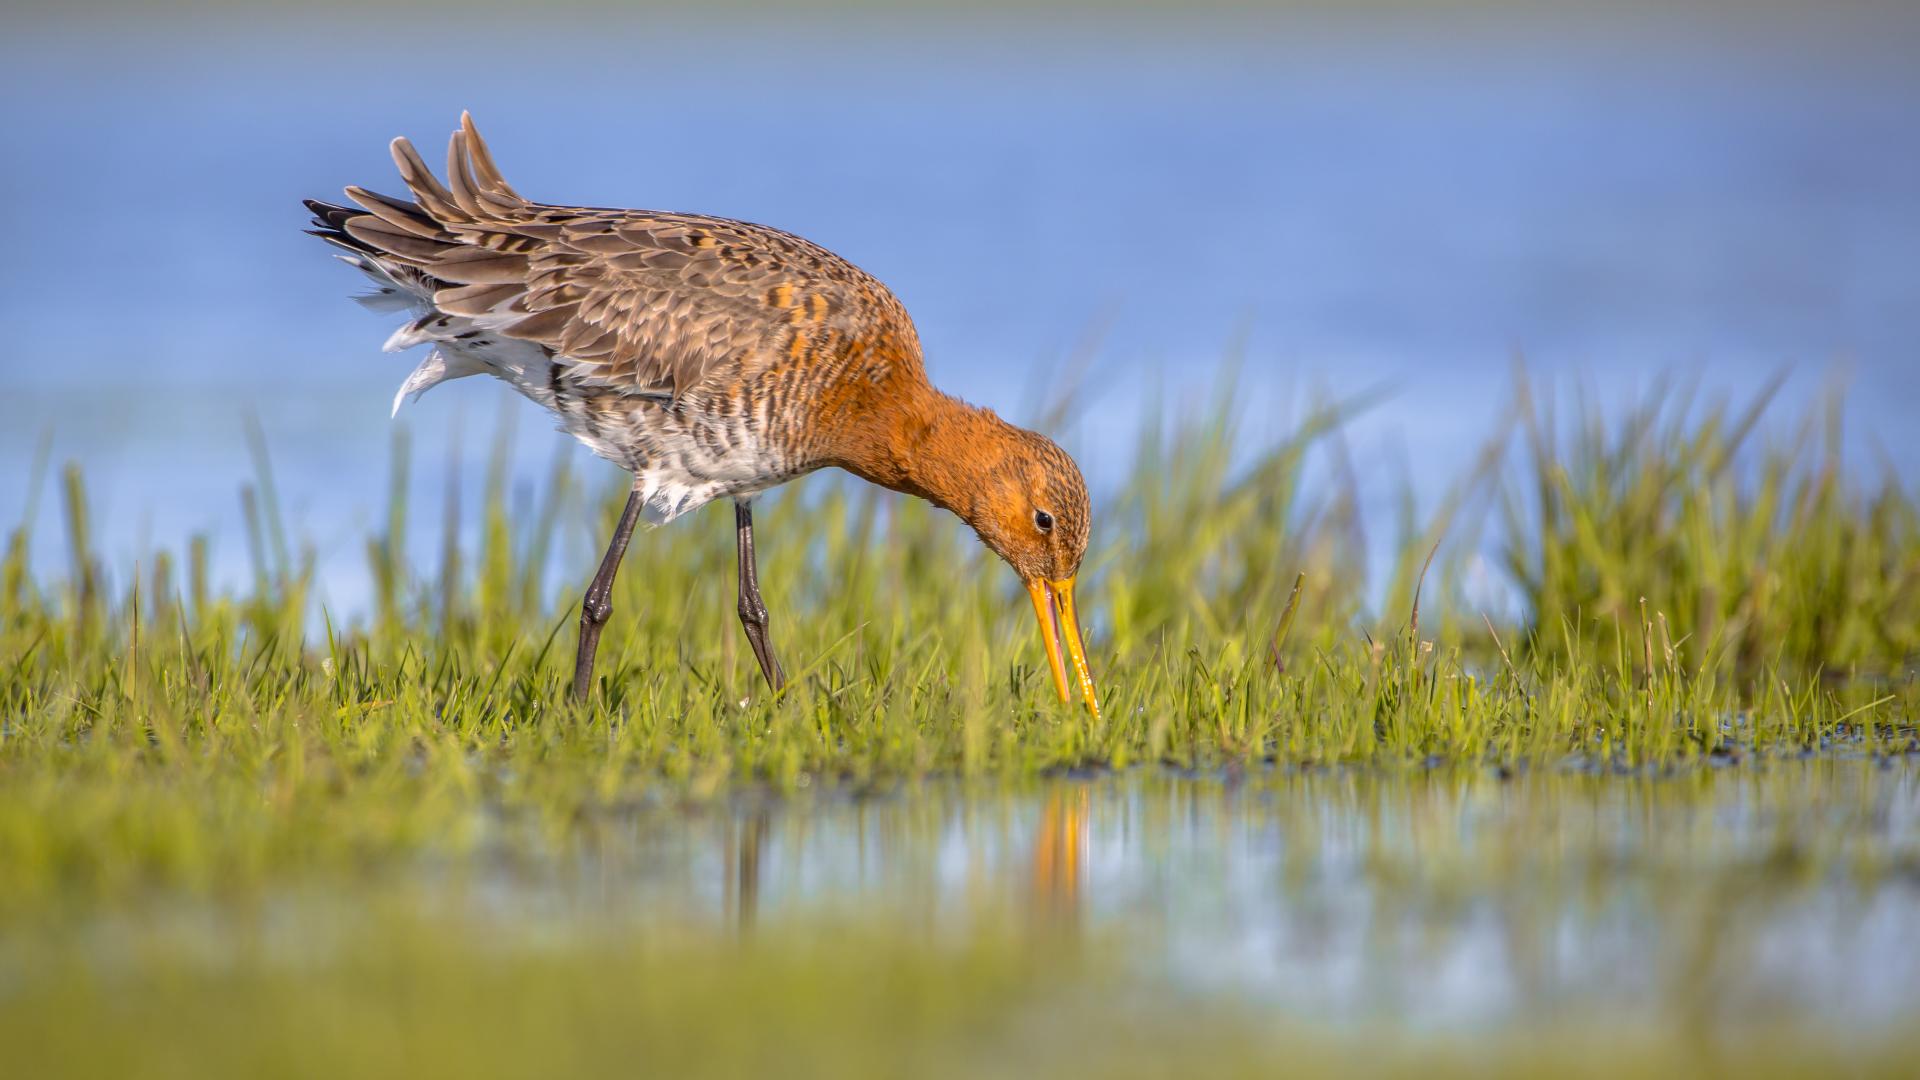 Godwit drinking from river